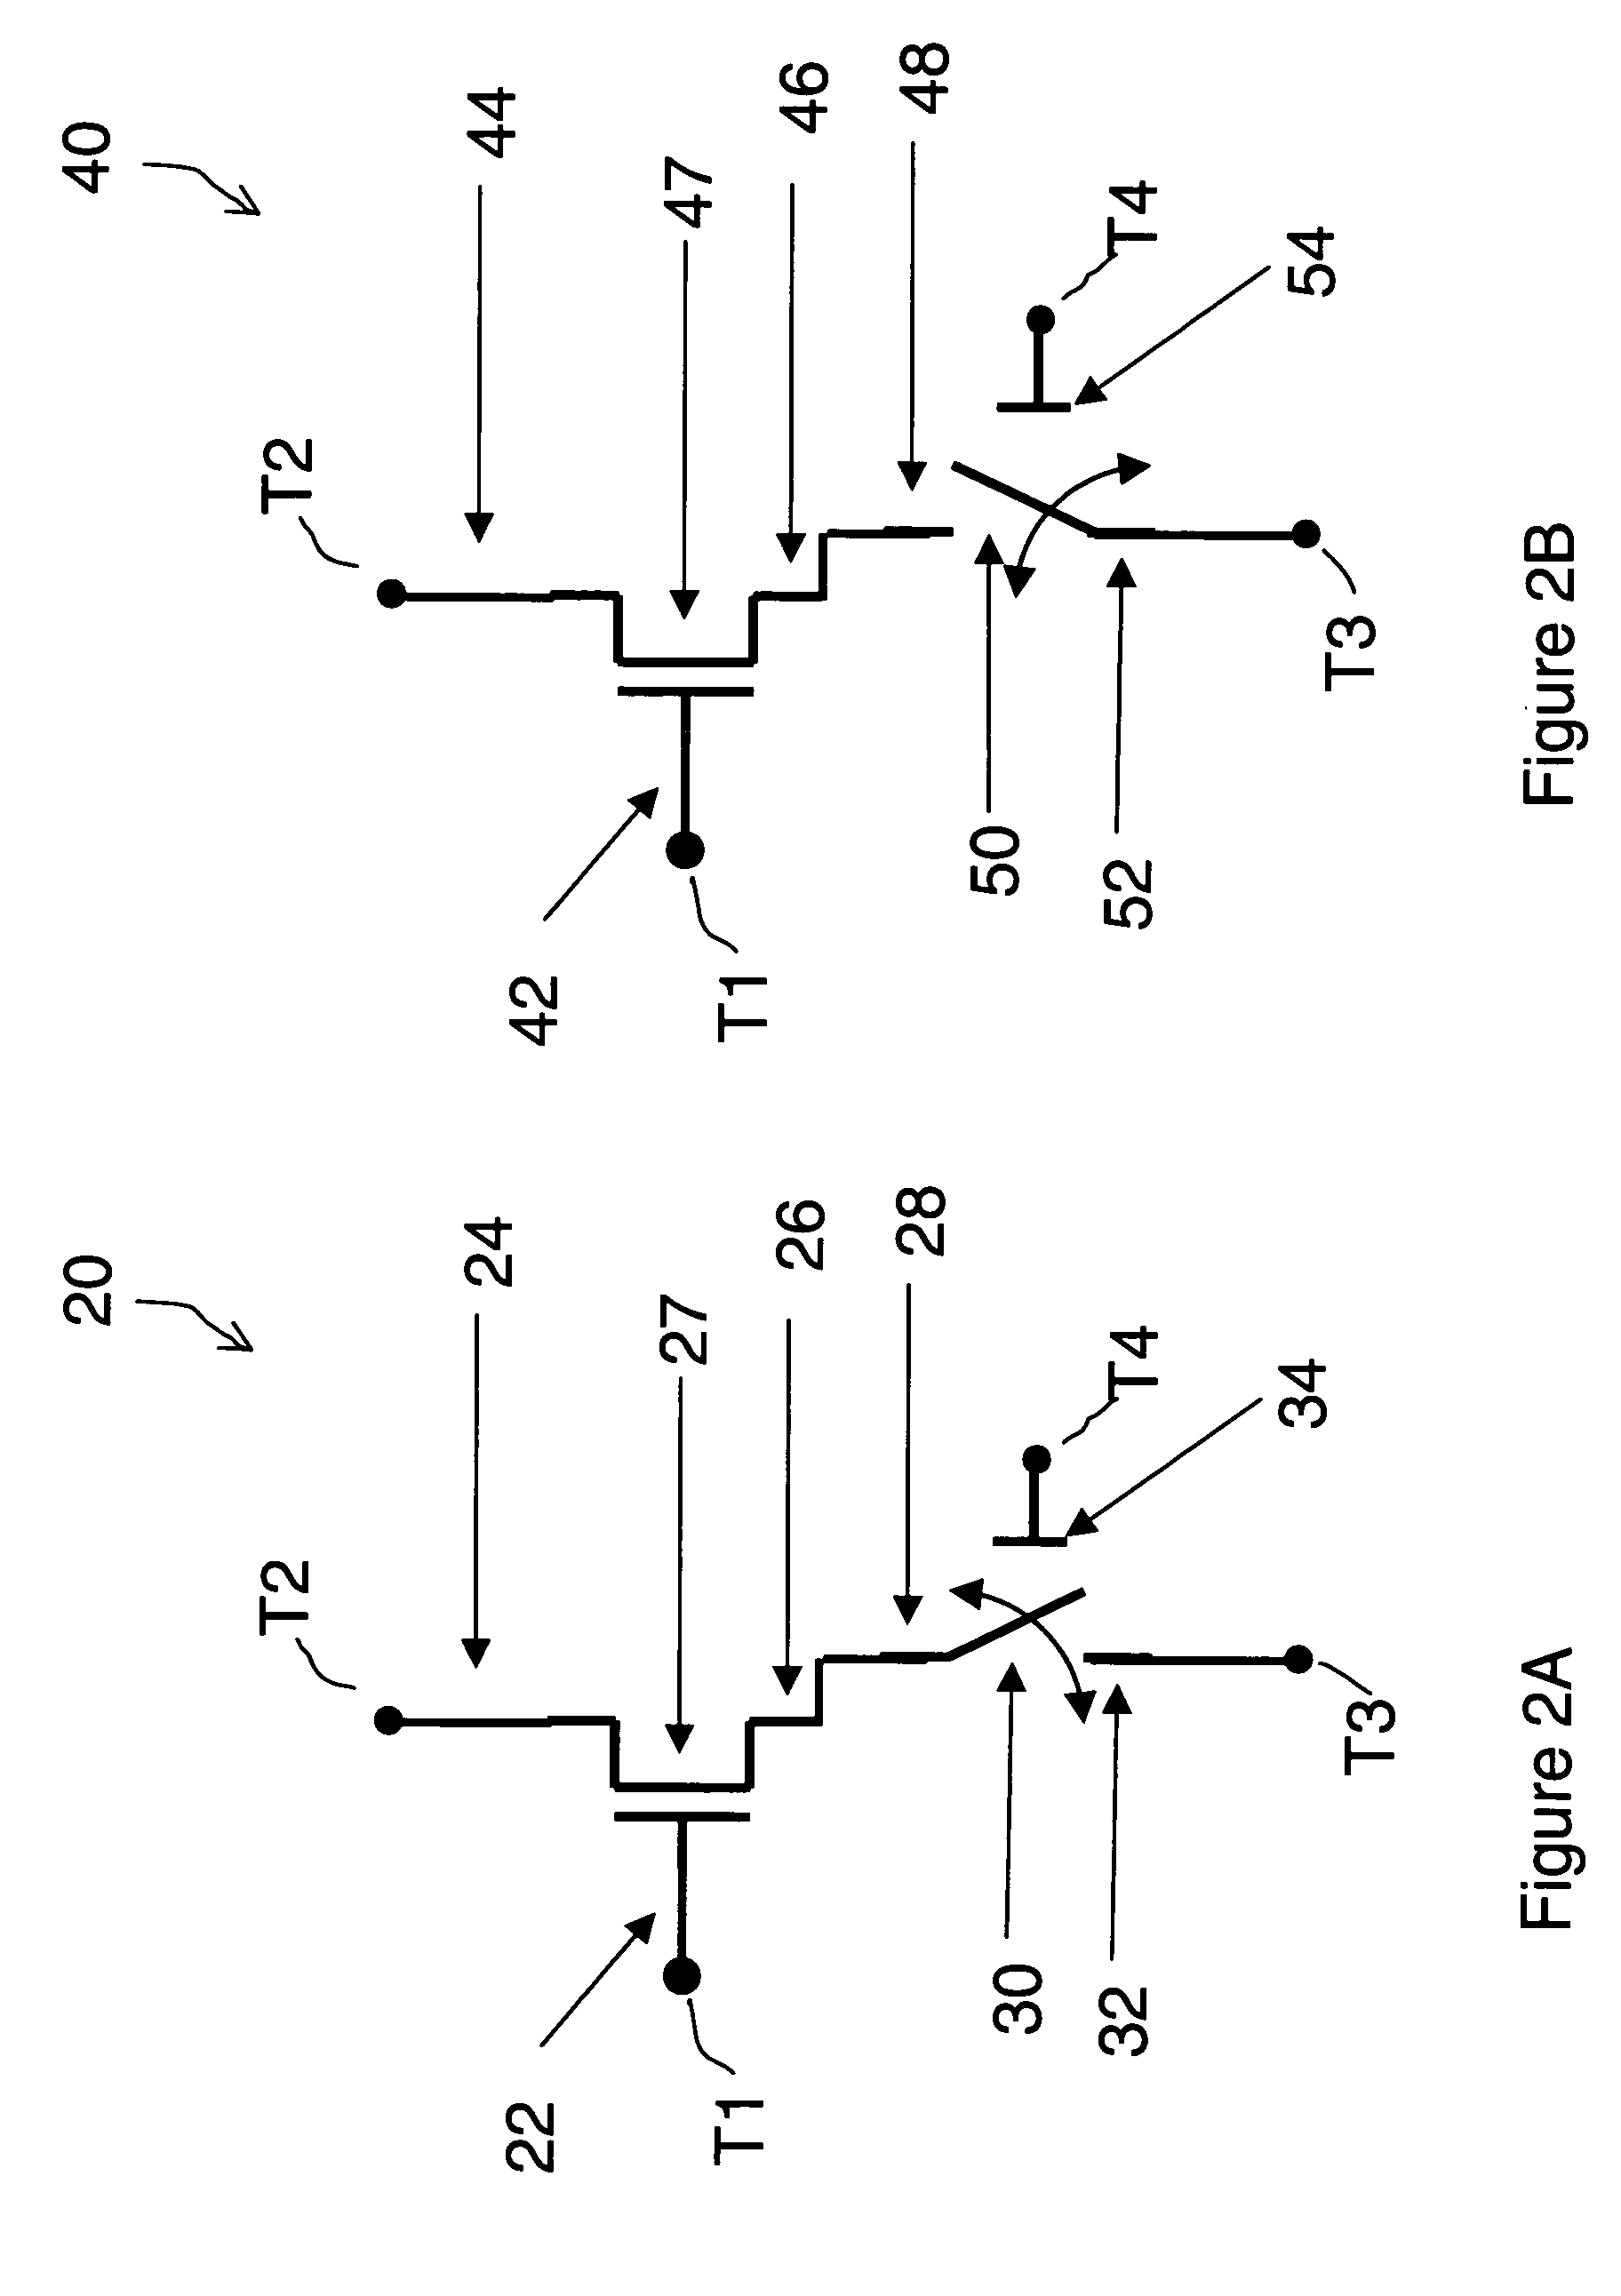 Field effect devices having a source controlled via a nanotube switching element